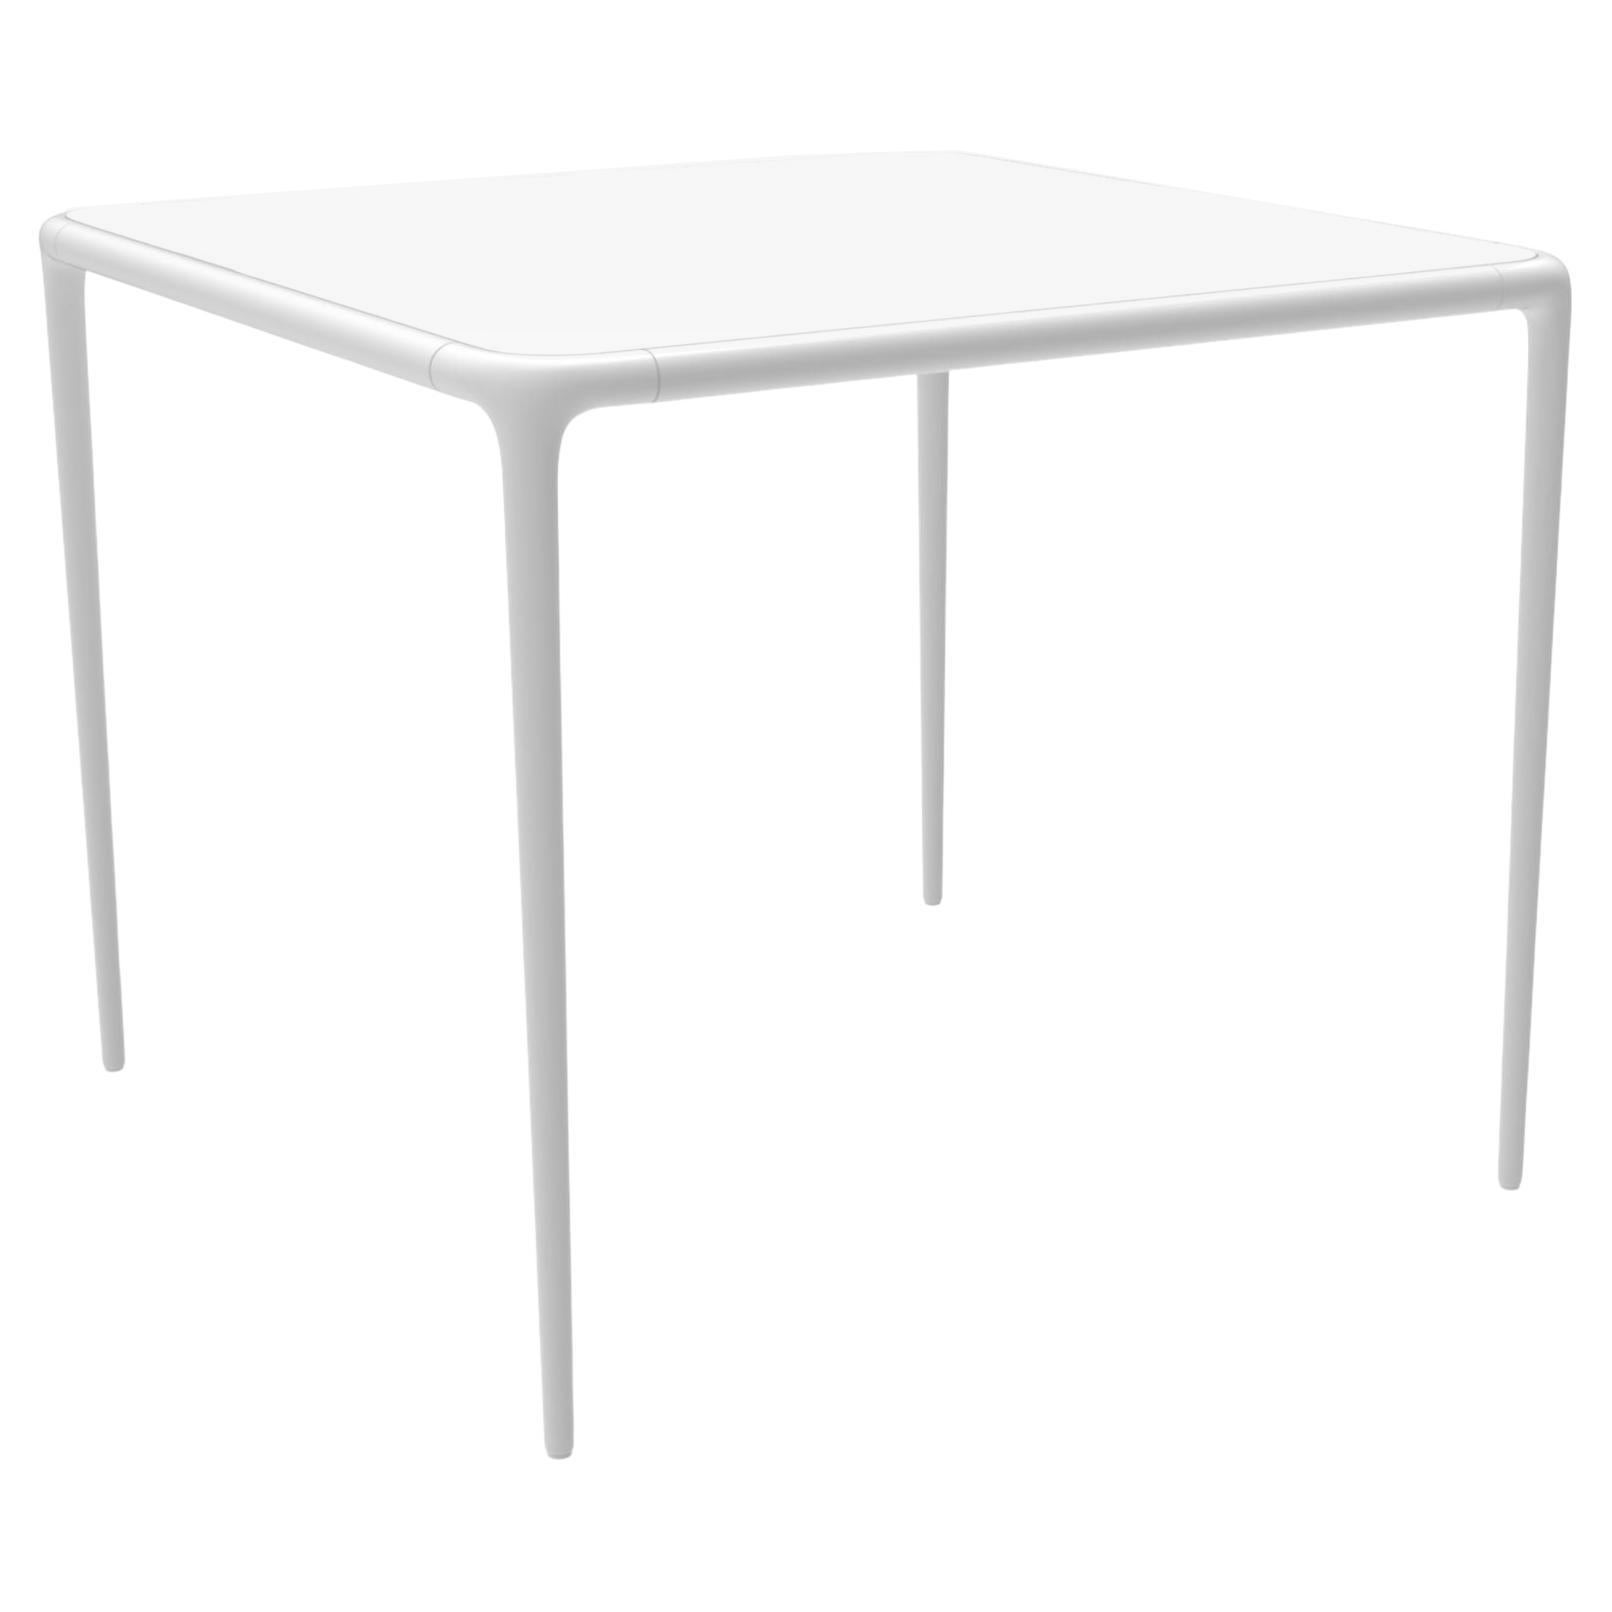 Xaloc White Glass Top Table 90 by Mowee